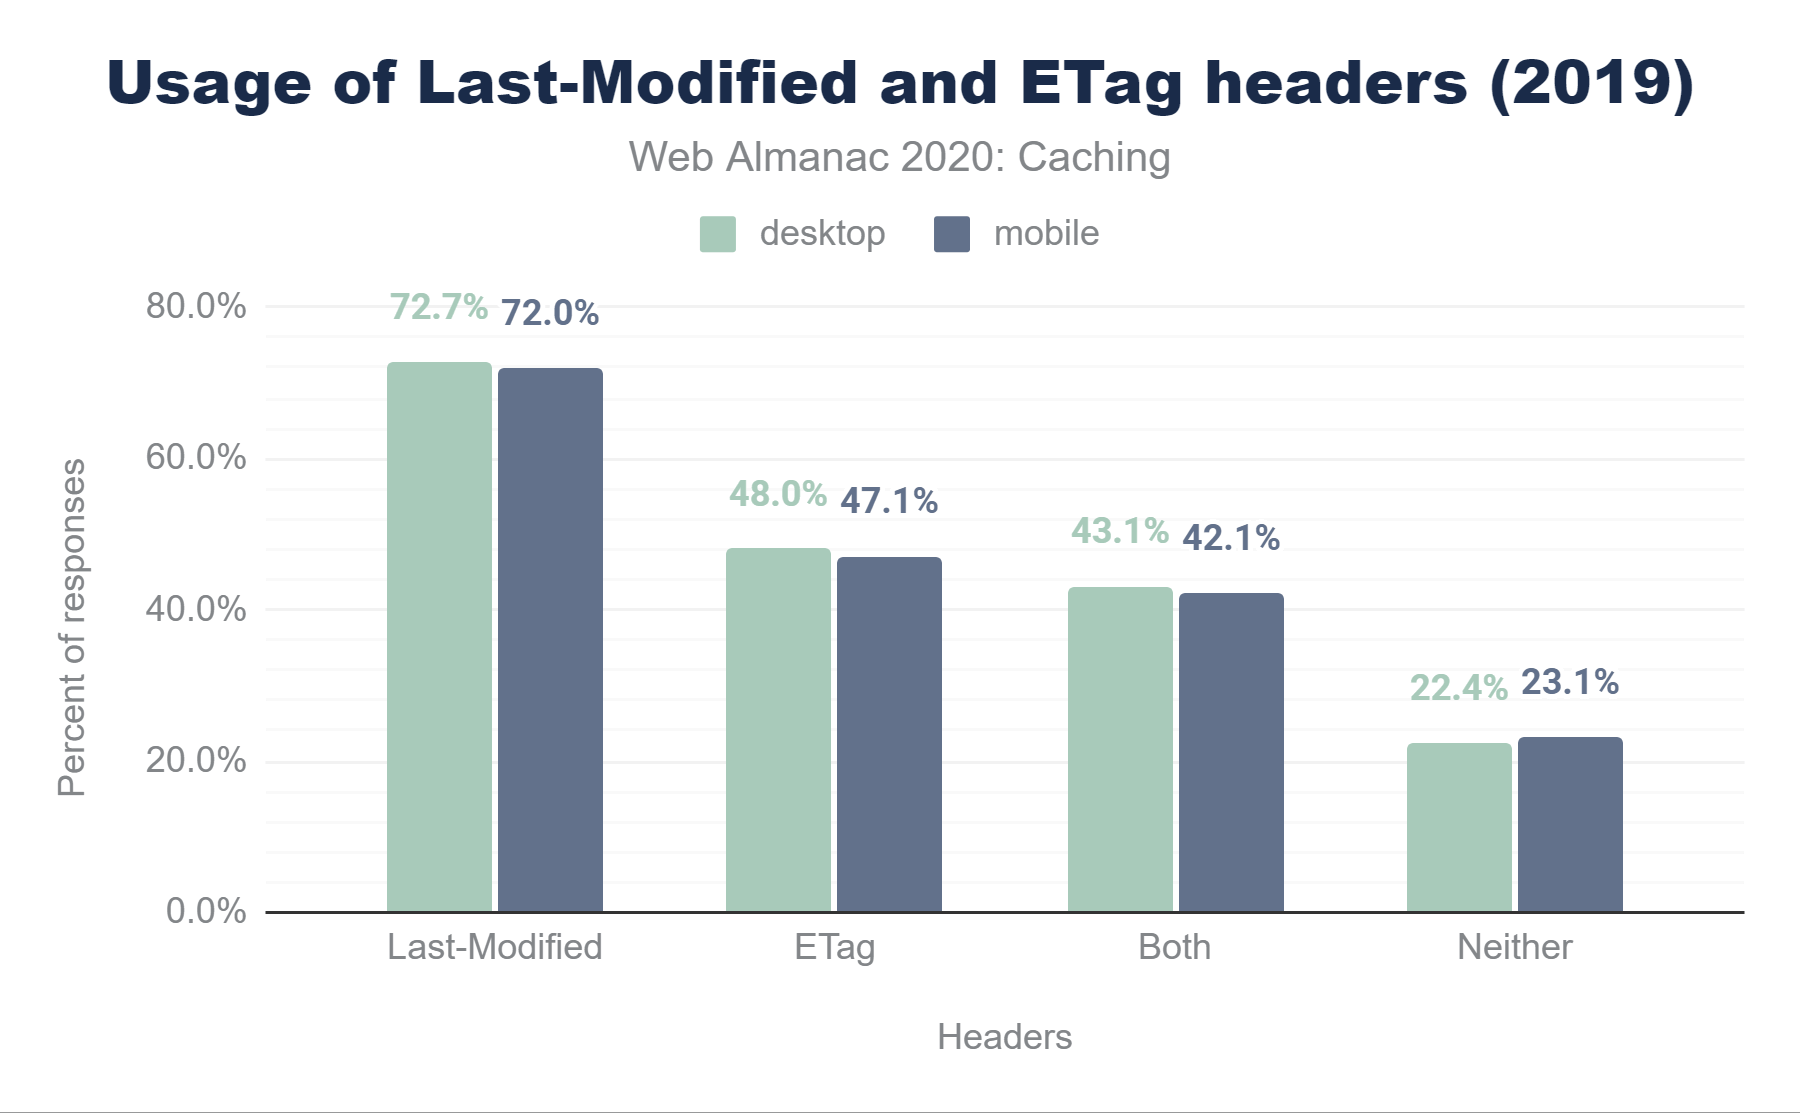 Adoption of validating freshness via Last-Modified and ETag headers in 2019.